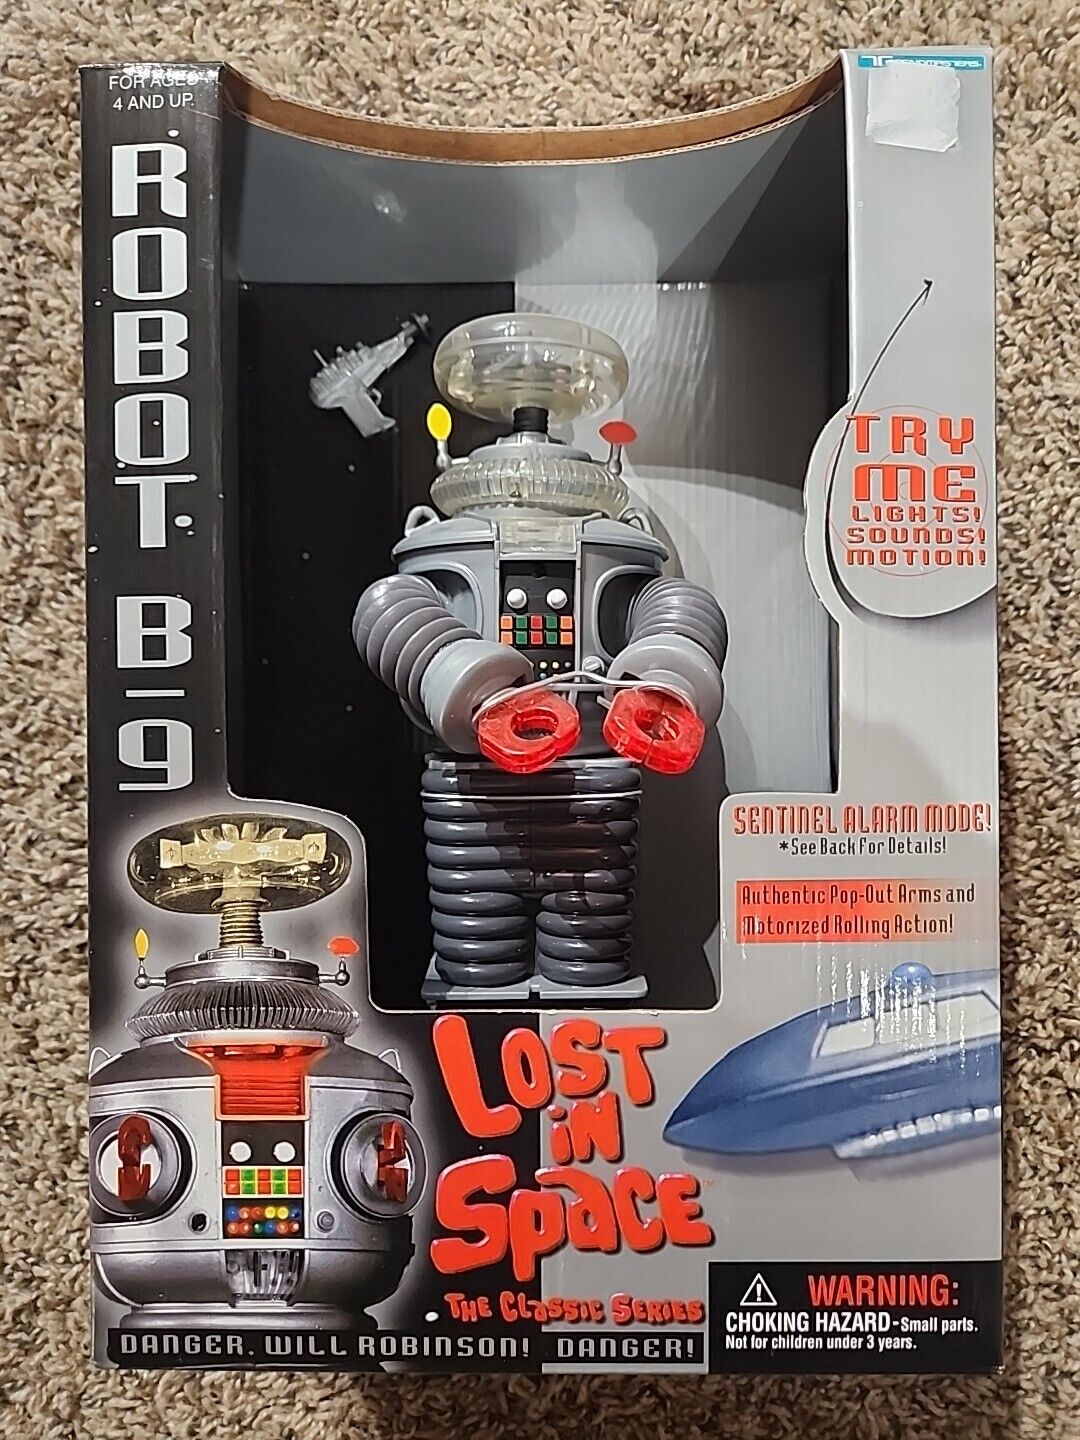 Lost In Space B-9 ROBOT W/ Laser Pistol Classic Series 1997. Excellent Condition